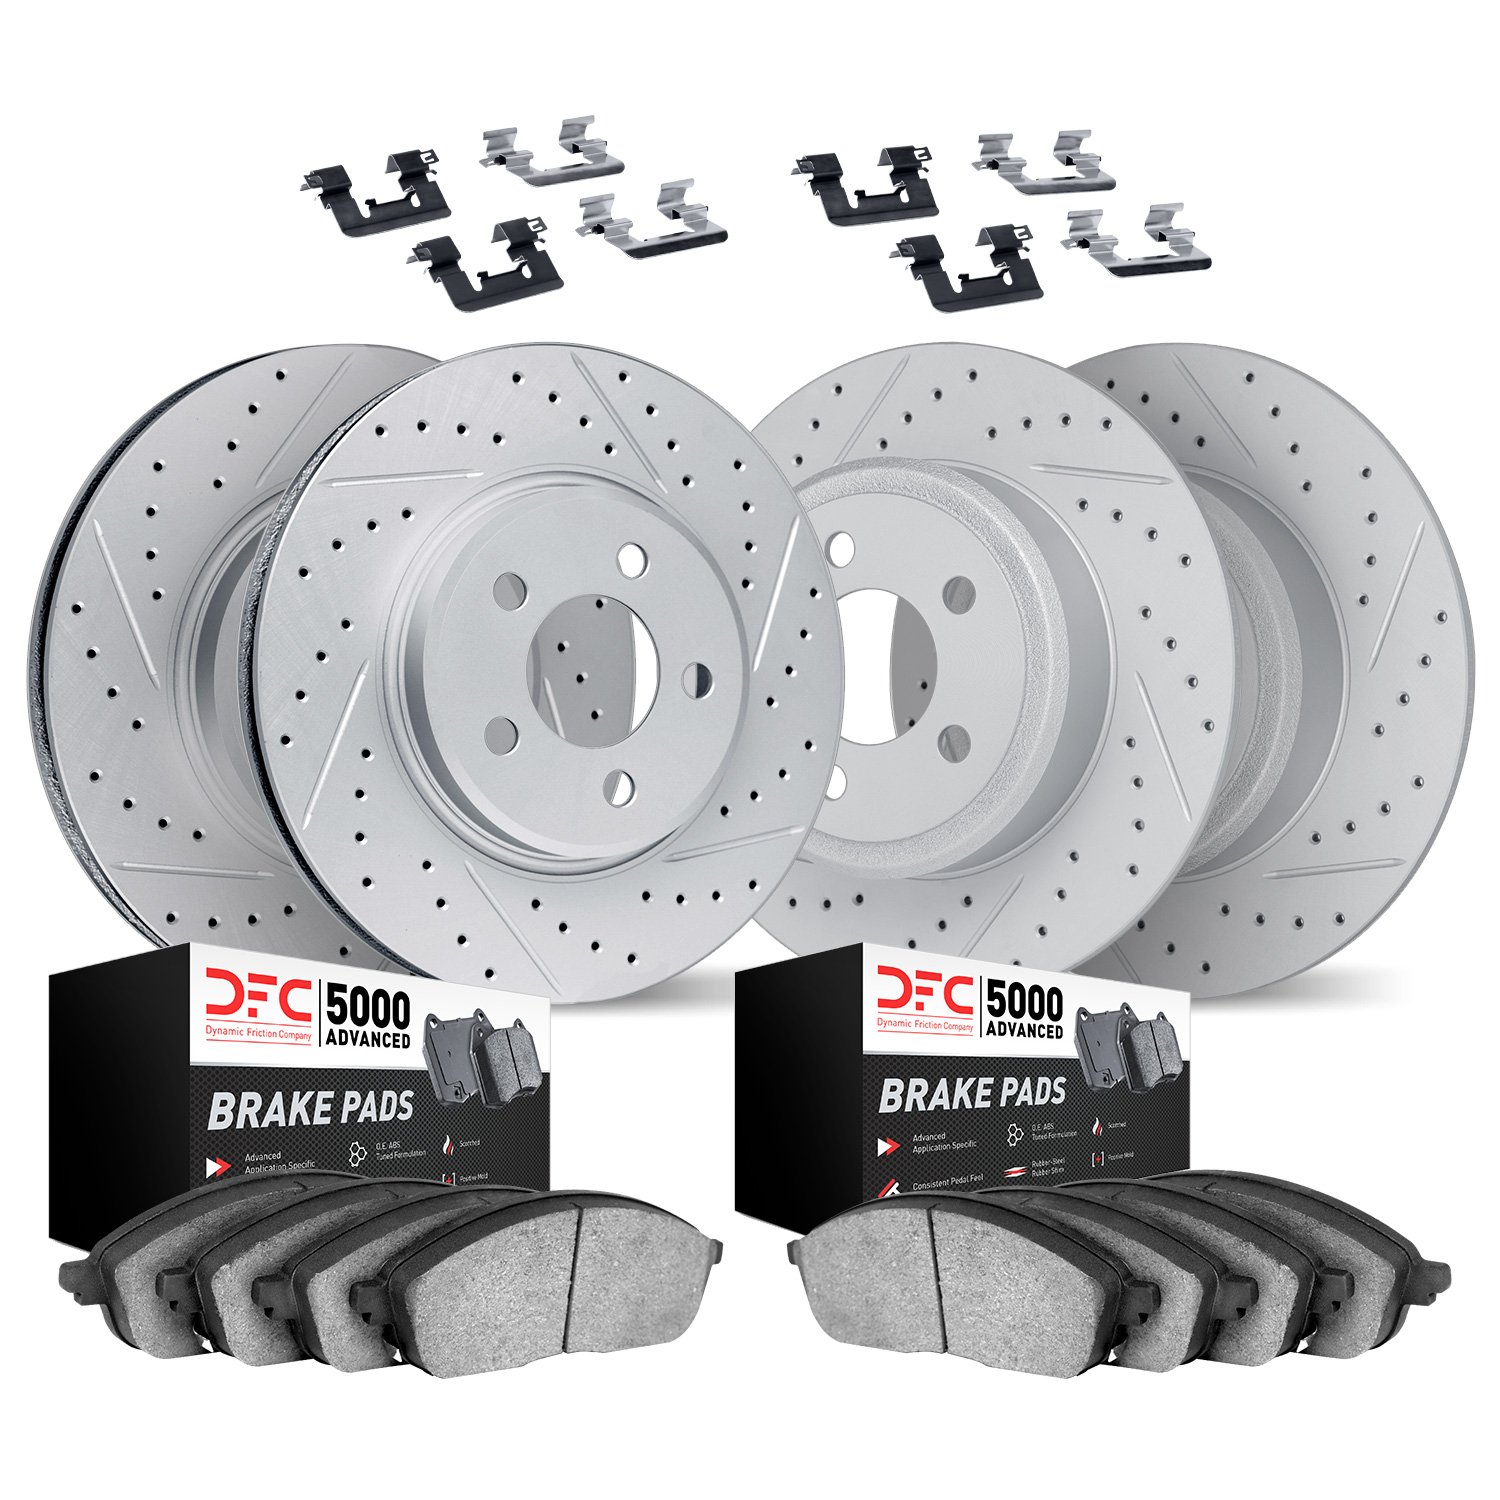 2514-52006 Geoperformance Drilled/Slotted Rotors w/5000 Advanced Brake Pads Kit & Hardware, 2005-2005 GM, Position: Front and Re